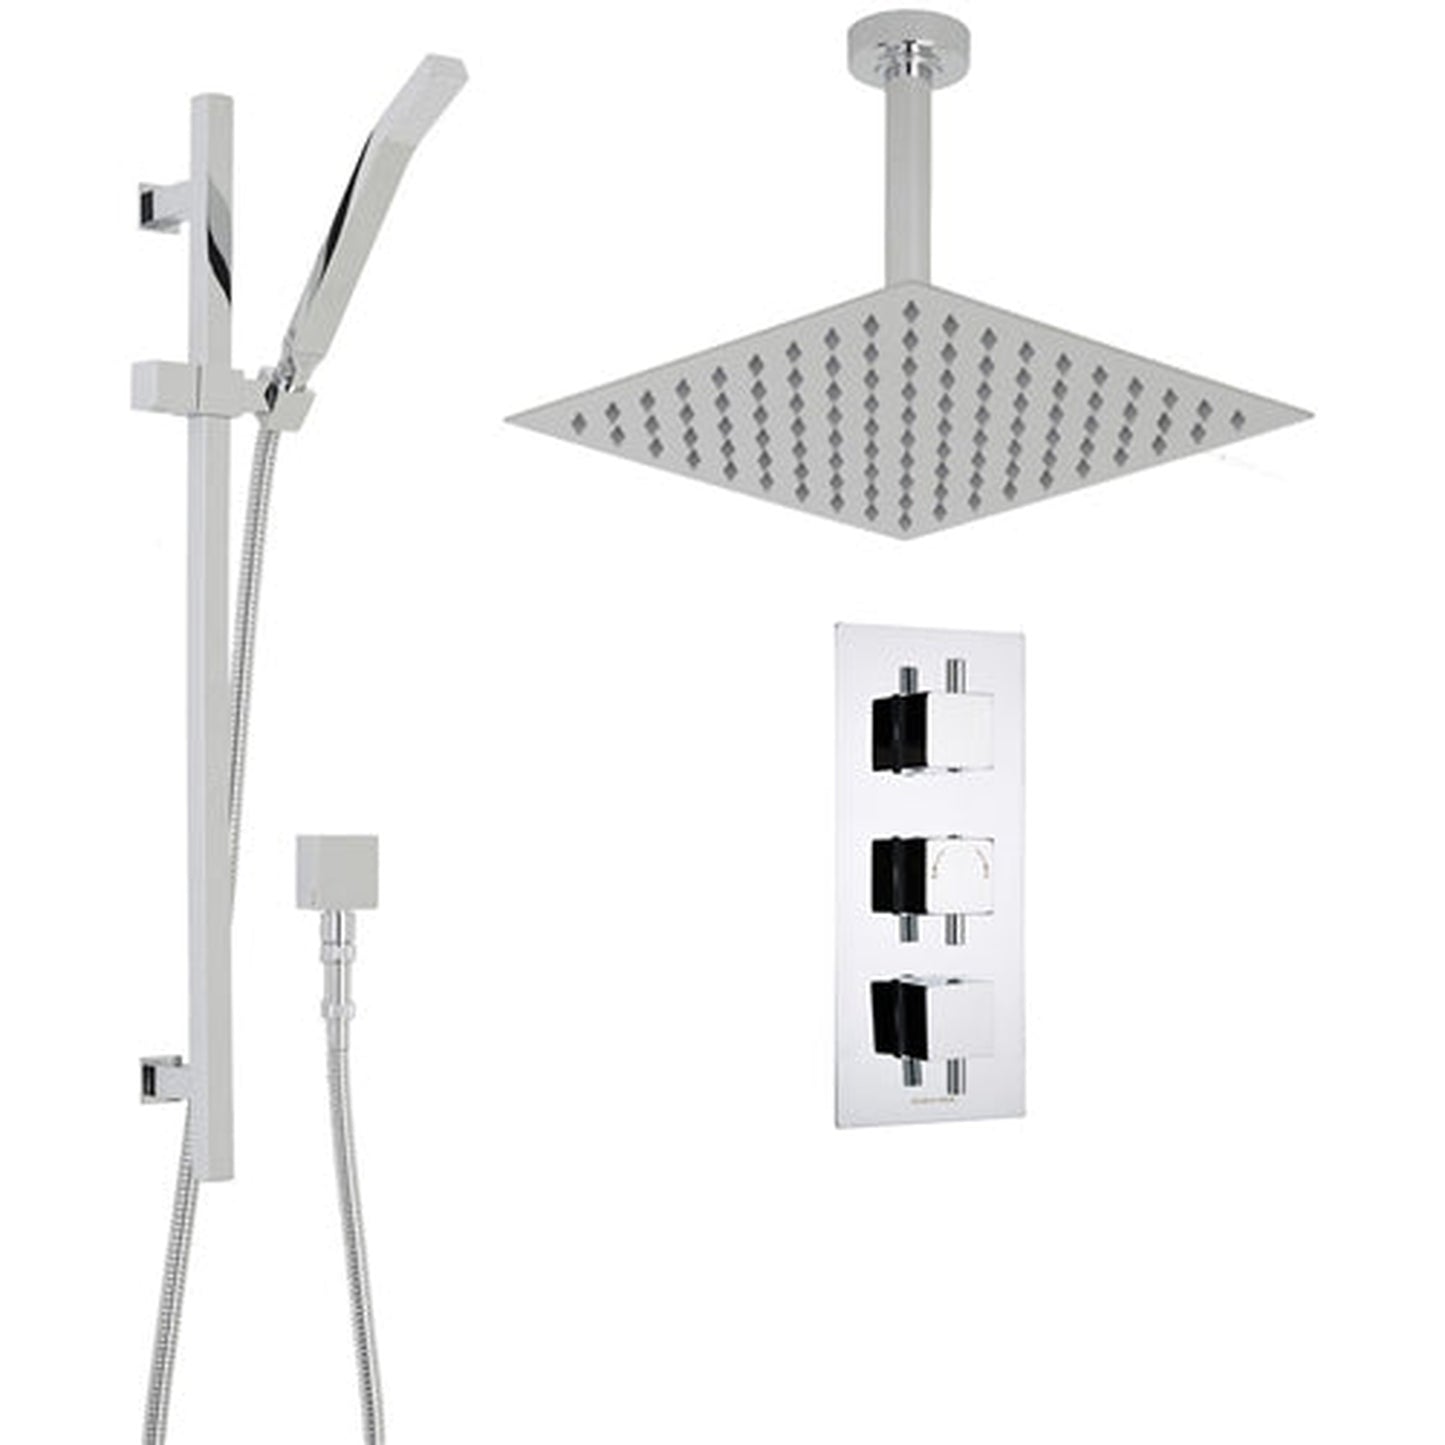 Fontana Liverpool 10" Chrome Round Ceiling Mounted Thermostatic Rainfall Shower System With Hand Shower and Without Water Powered LED Lights